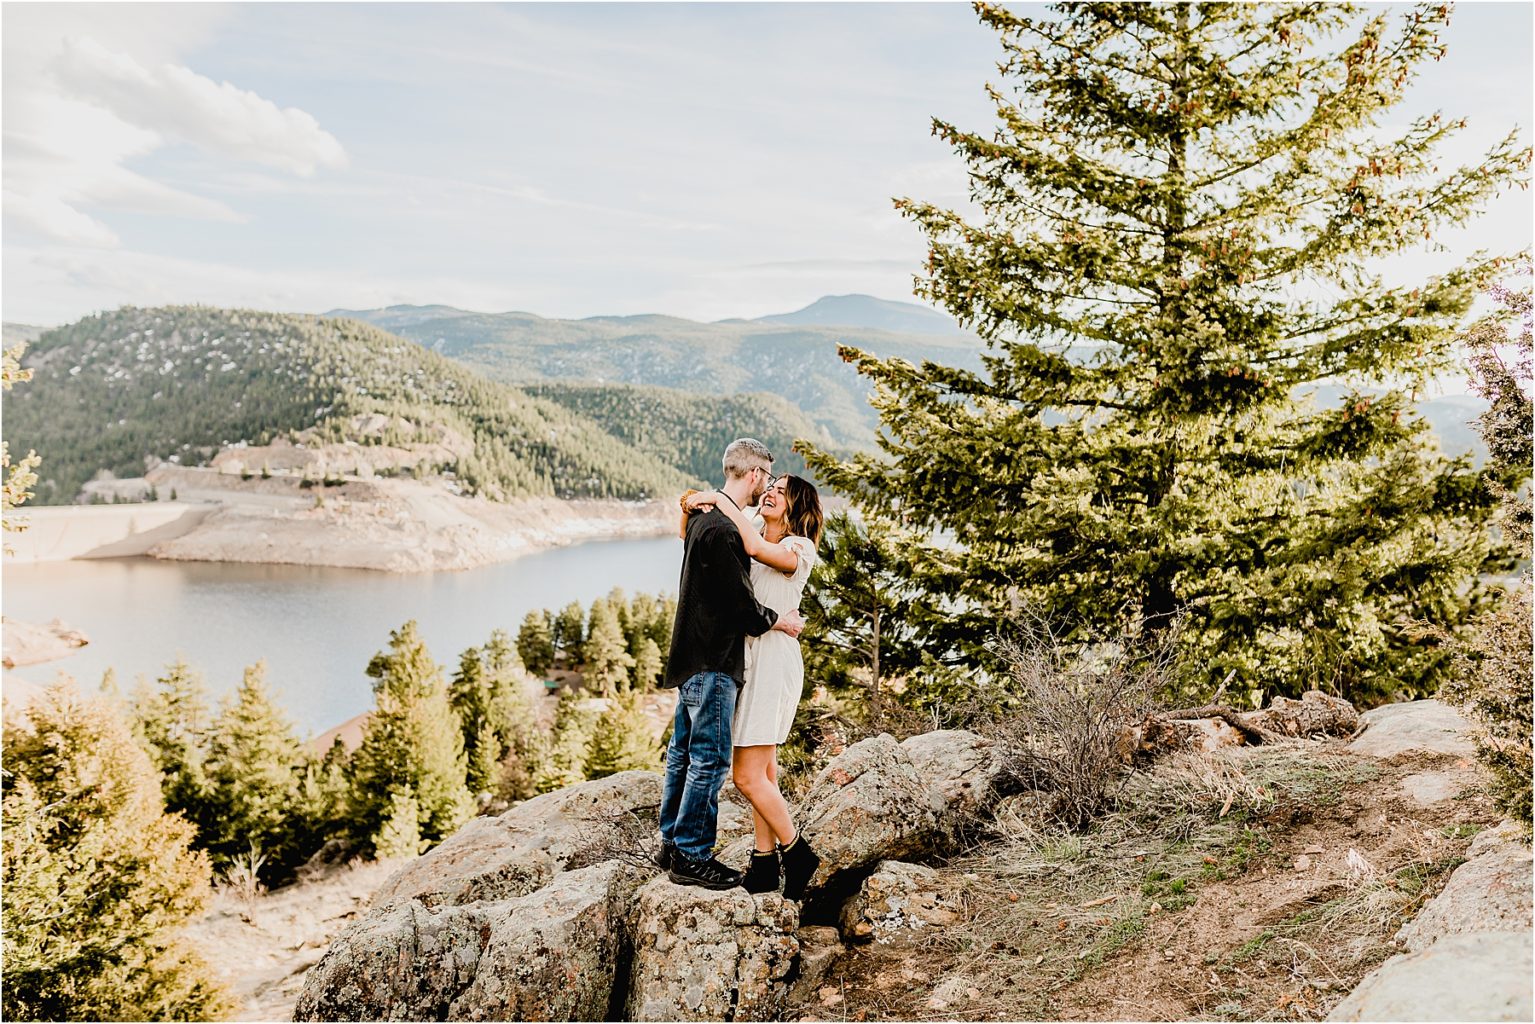 Marissa and Casey's adventure couples session in boulder colorado at gross reservoir. We took in amazing mountain and lake views, and watched a beautiful sunset up high on the rocks.